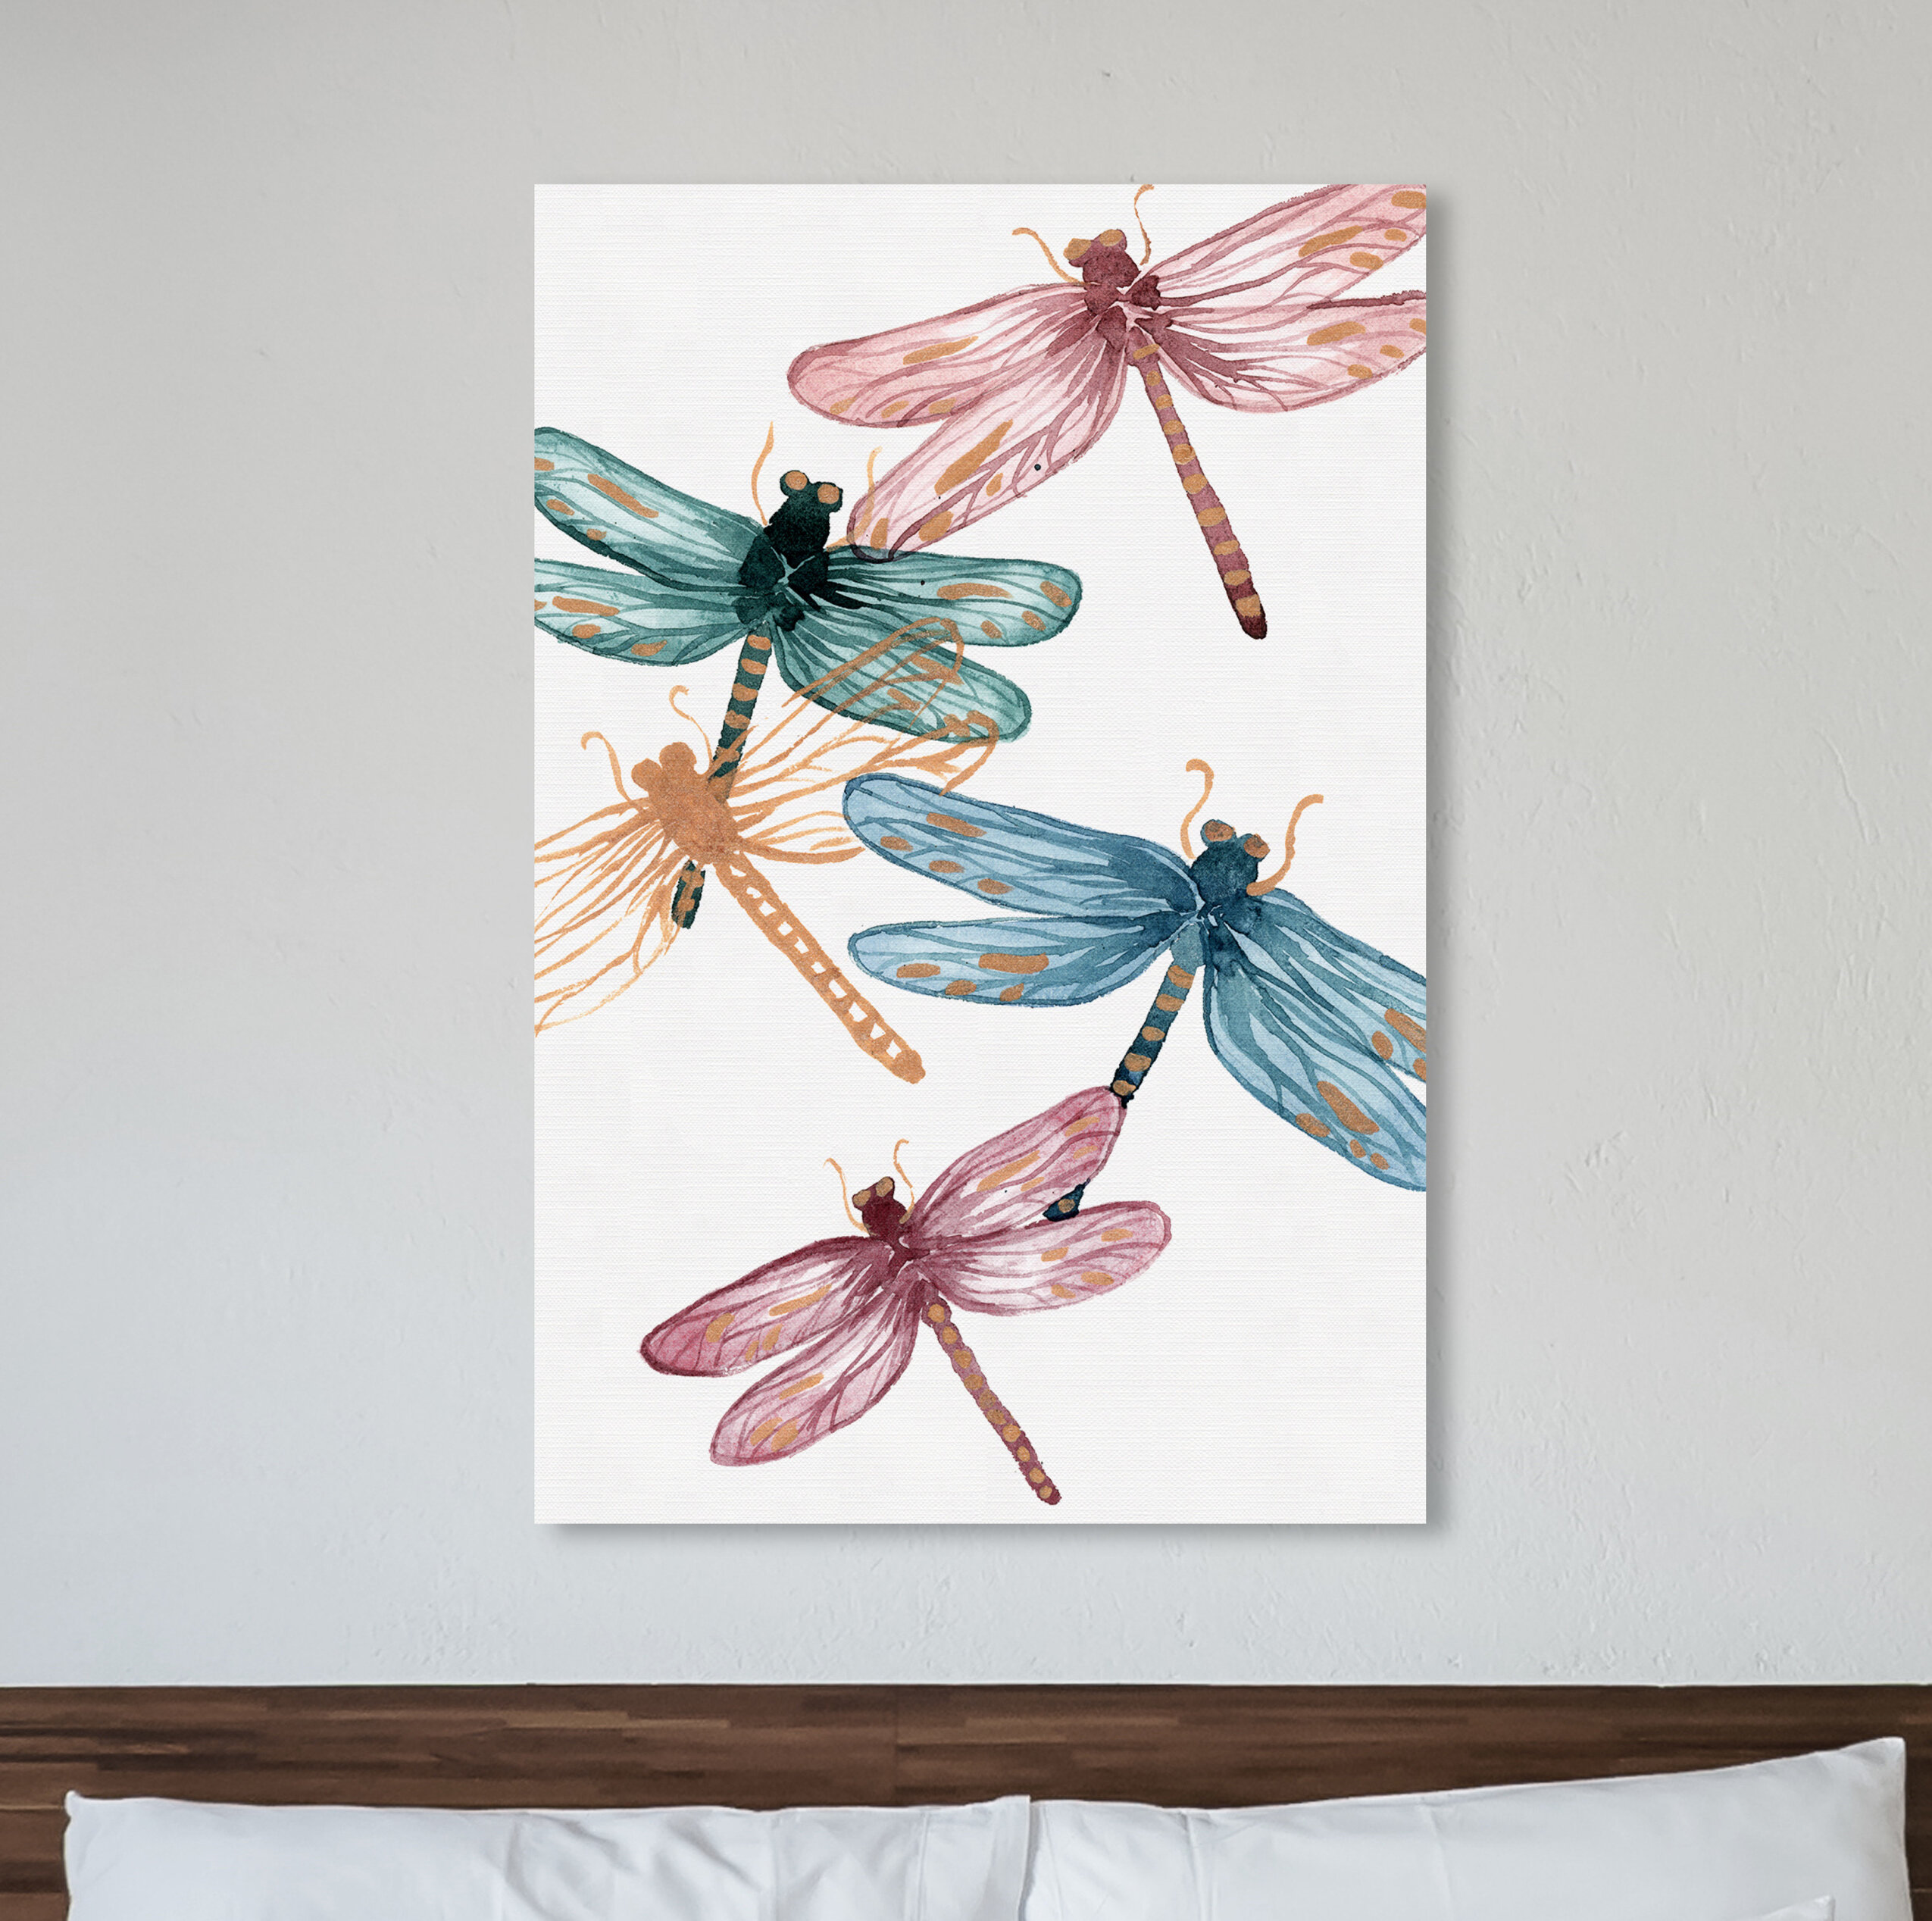 Flower and Dragonfly Original 16x20 Canvas Painting by Skinderella